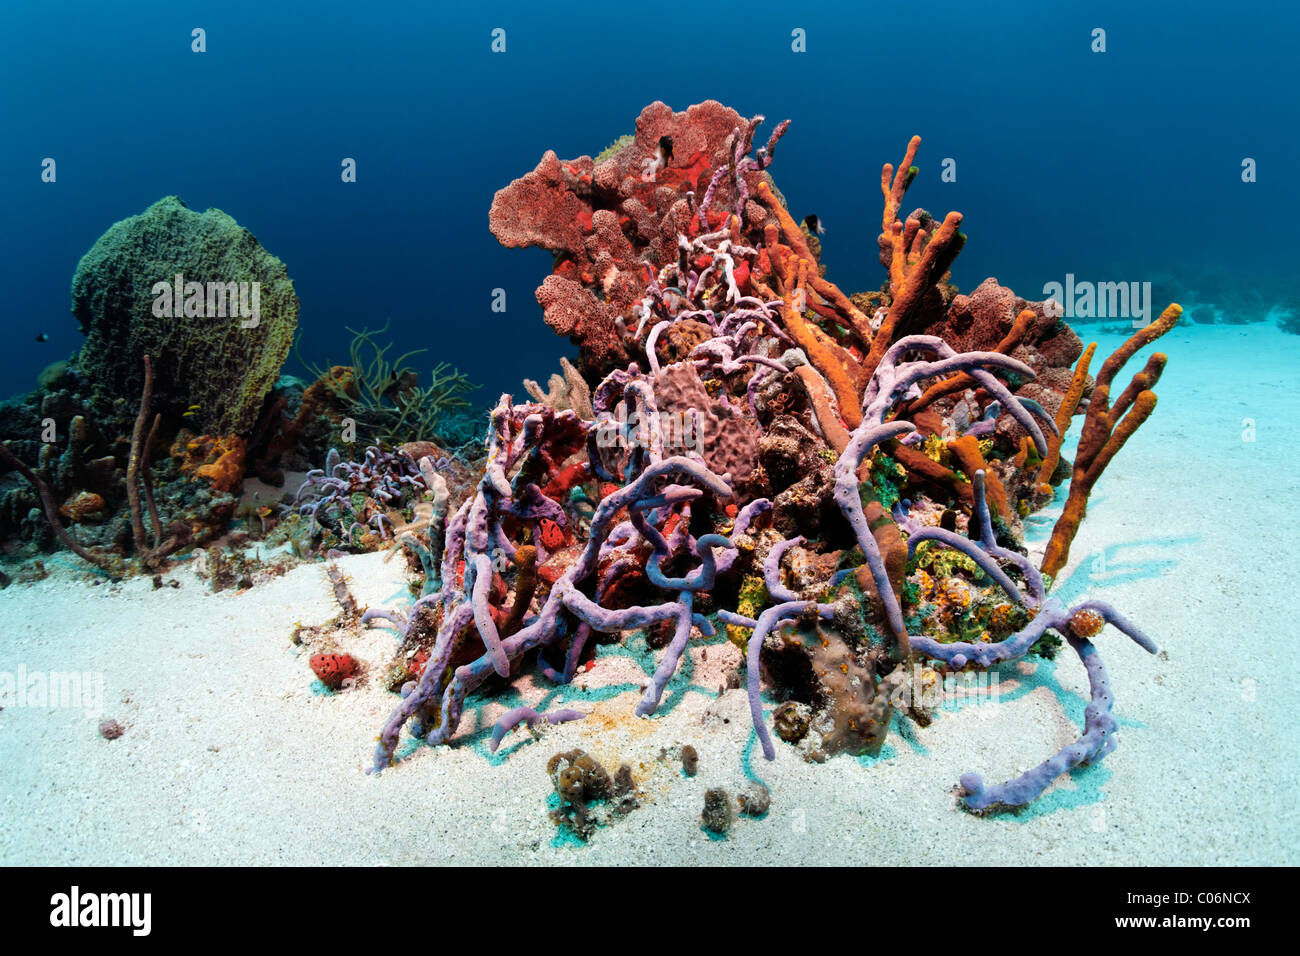 Reef block, coral reef, overgrown, multicolor, sorts, sponges, corals, sand ground, Little Tobago, Speyside, Trinidad and Tobago Stock Photo